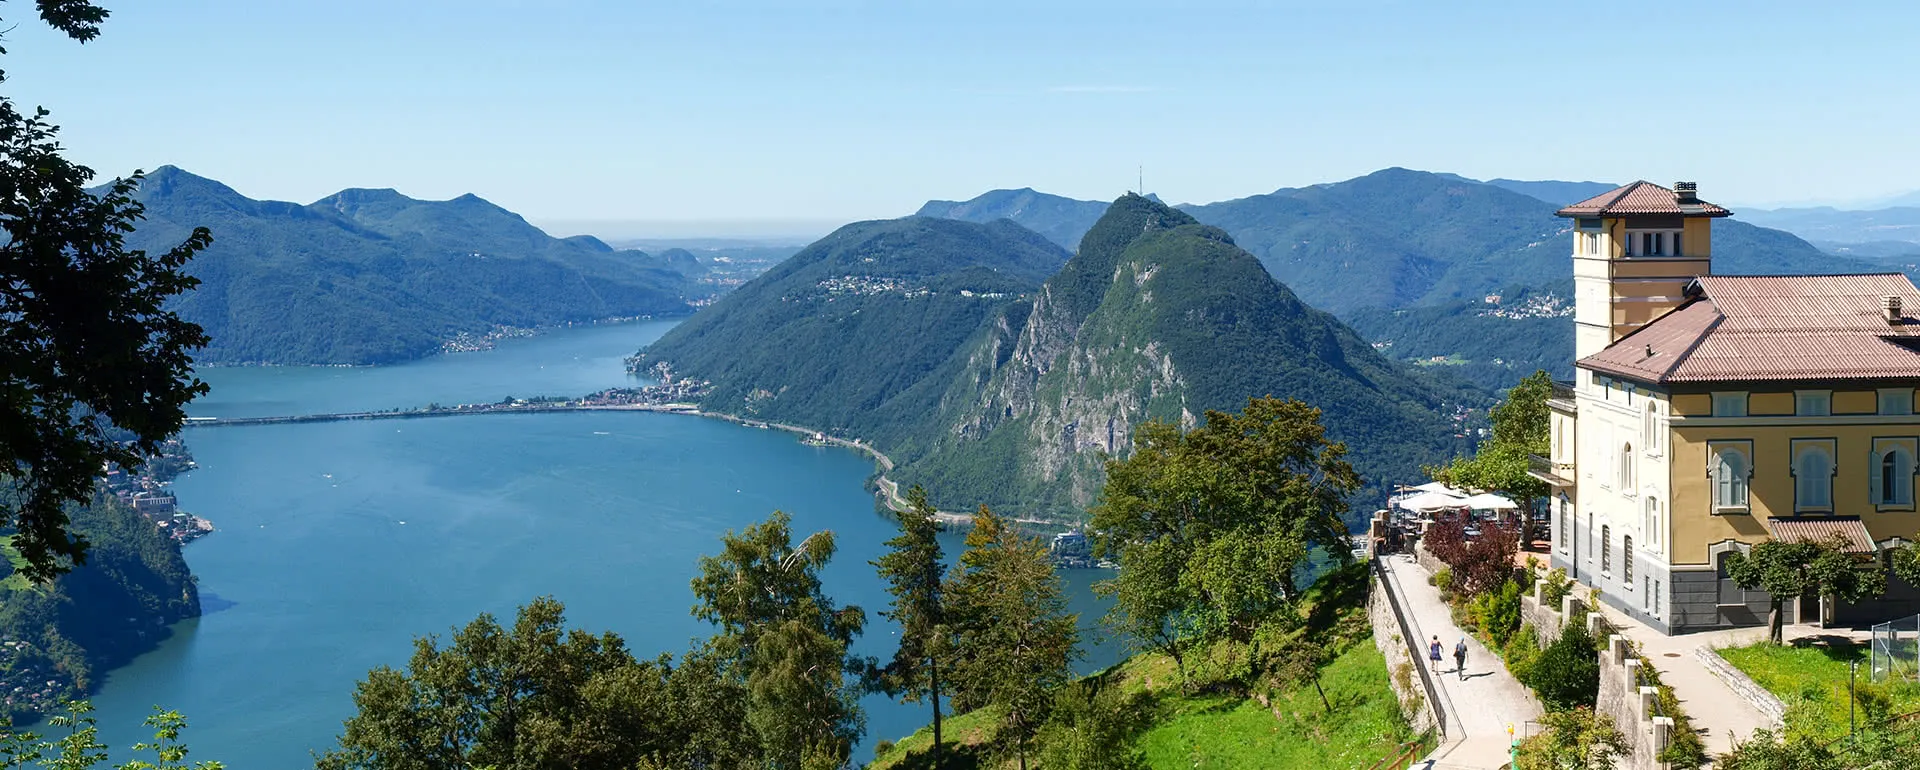 Meeting and conference location Lugano